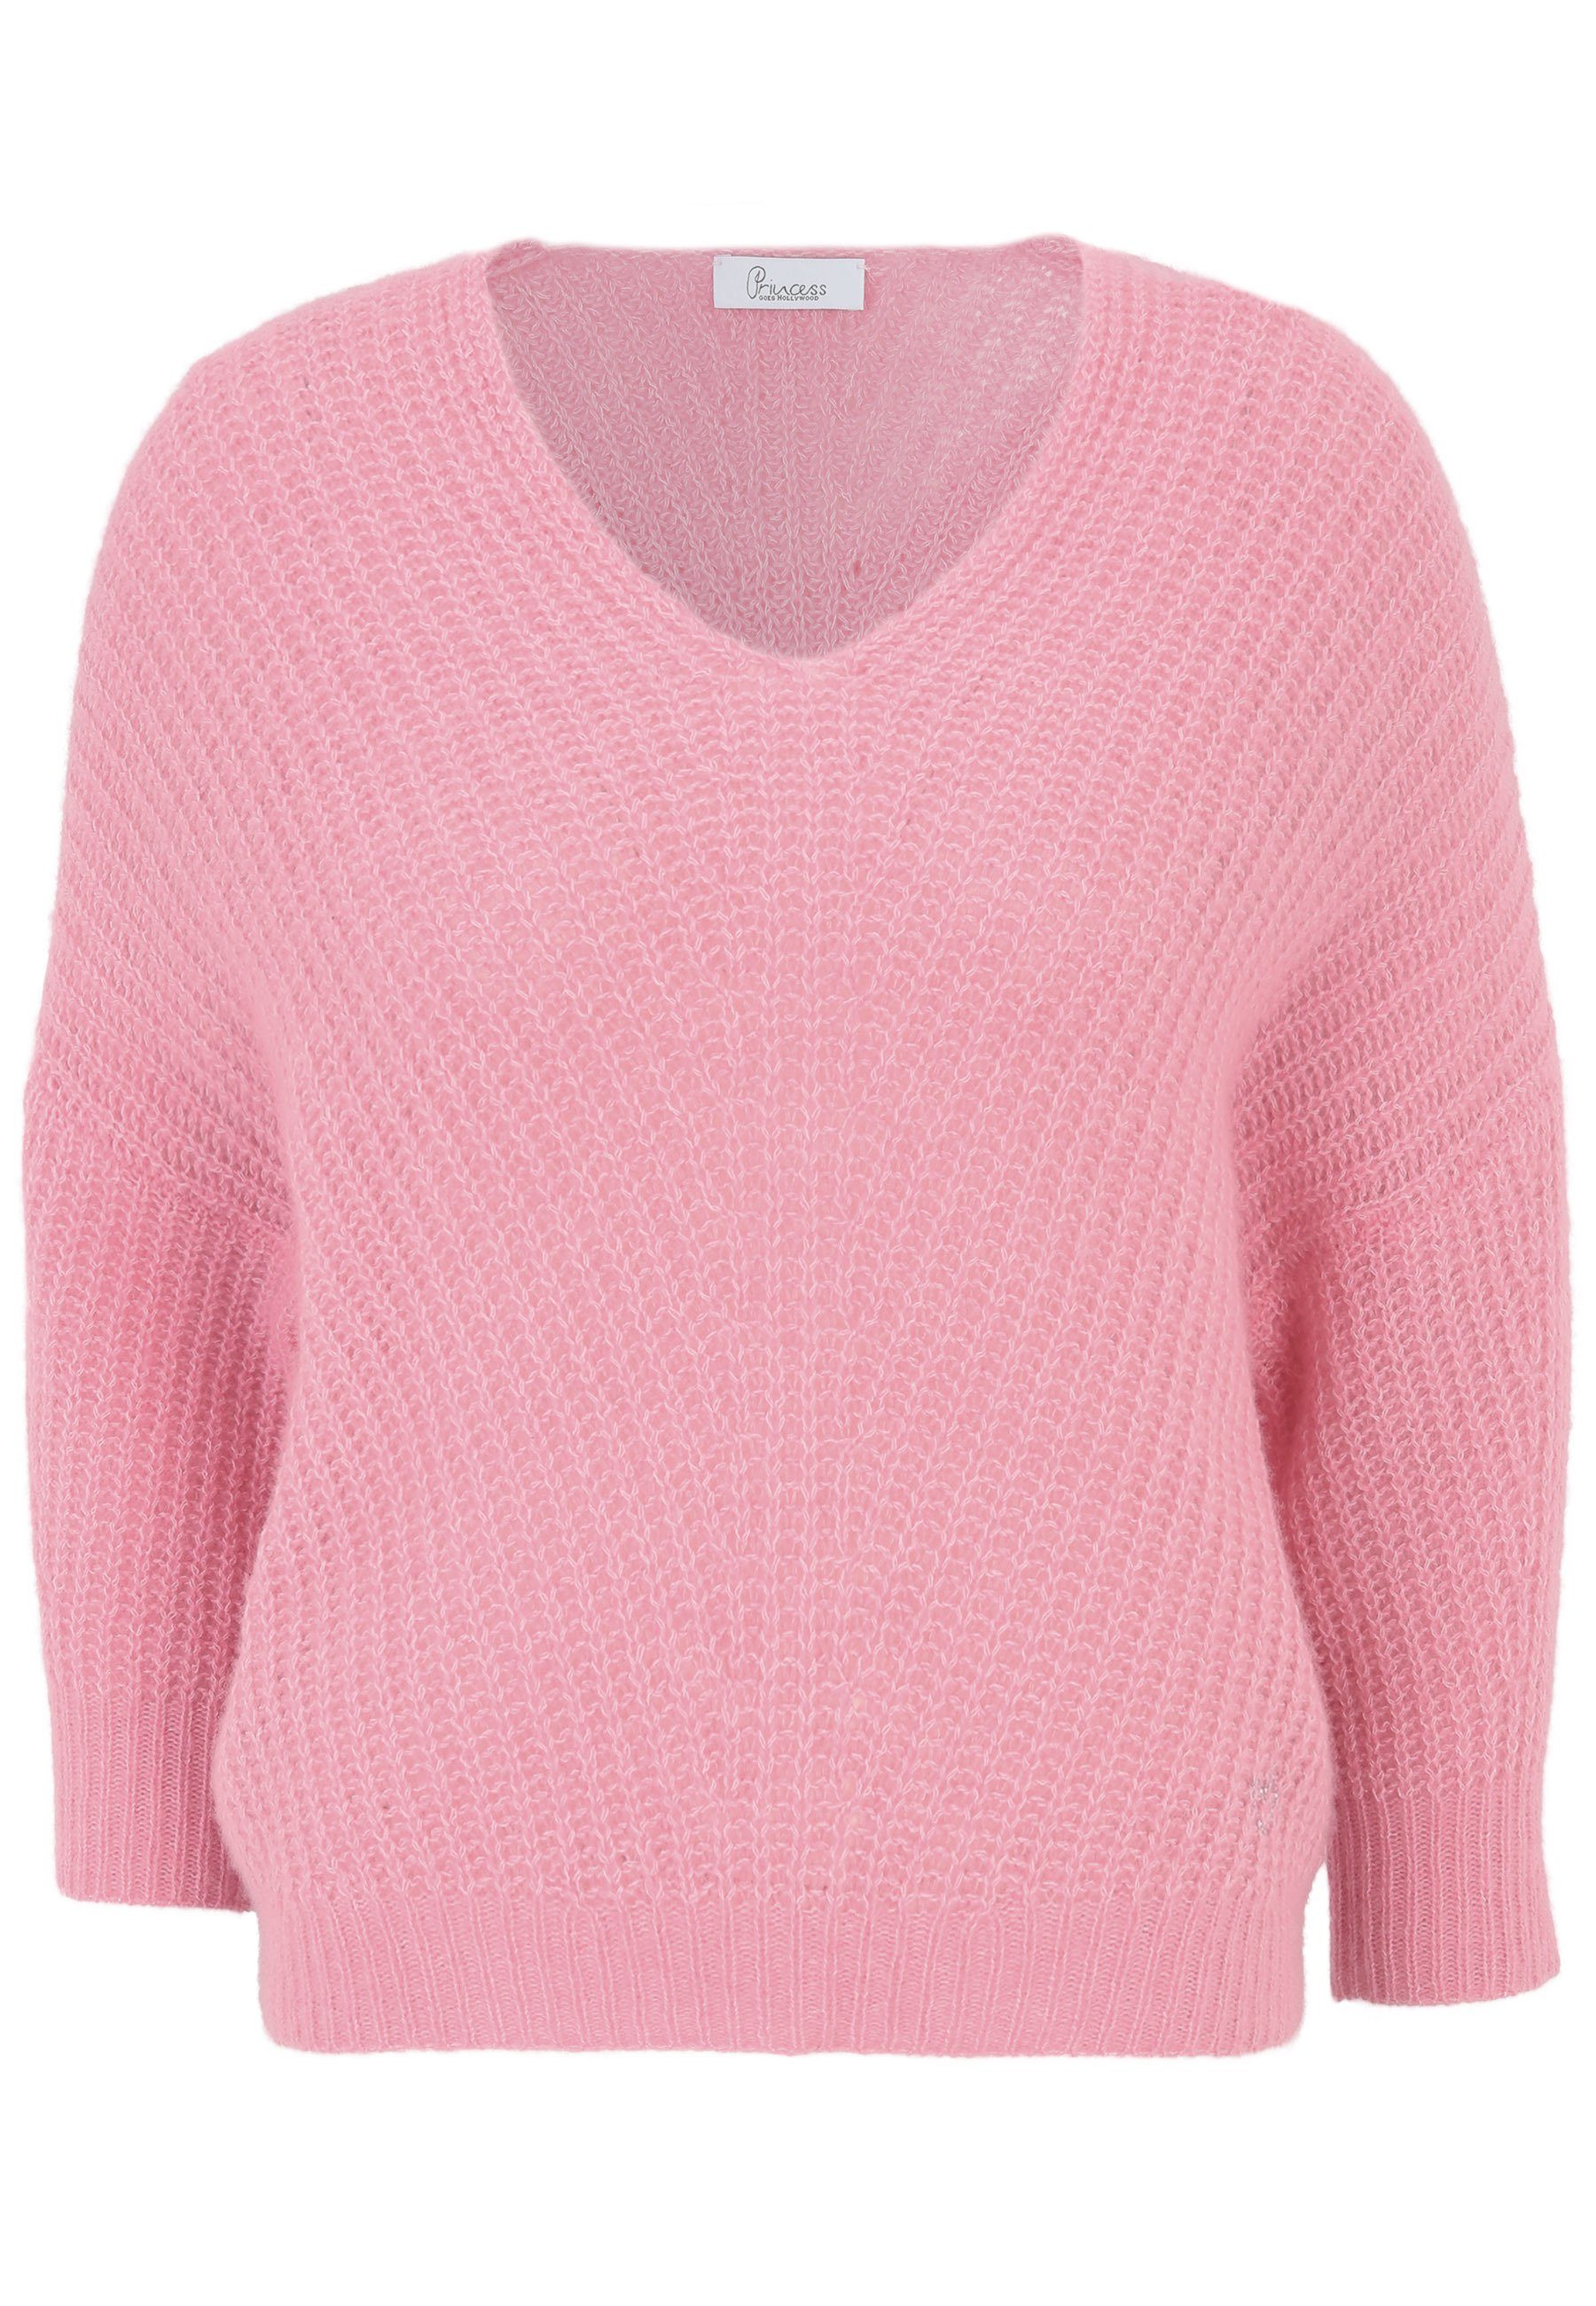 Princess goes Hollywood Strickpullover mit Cashmere